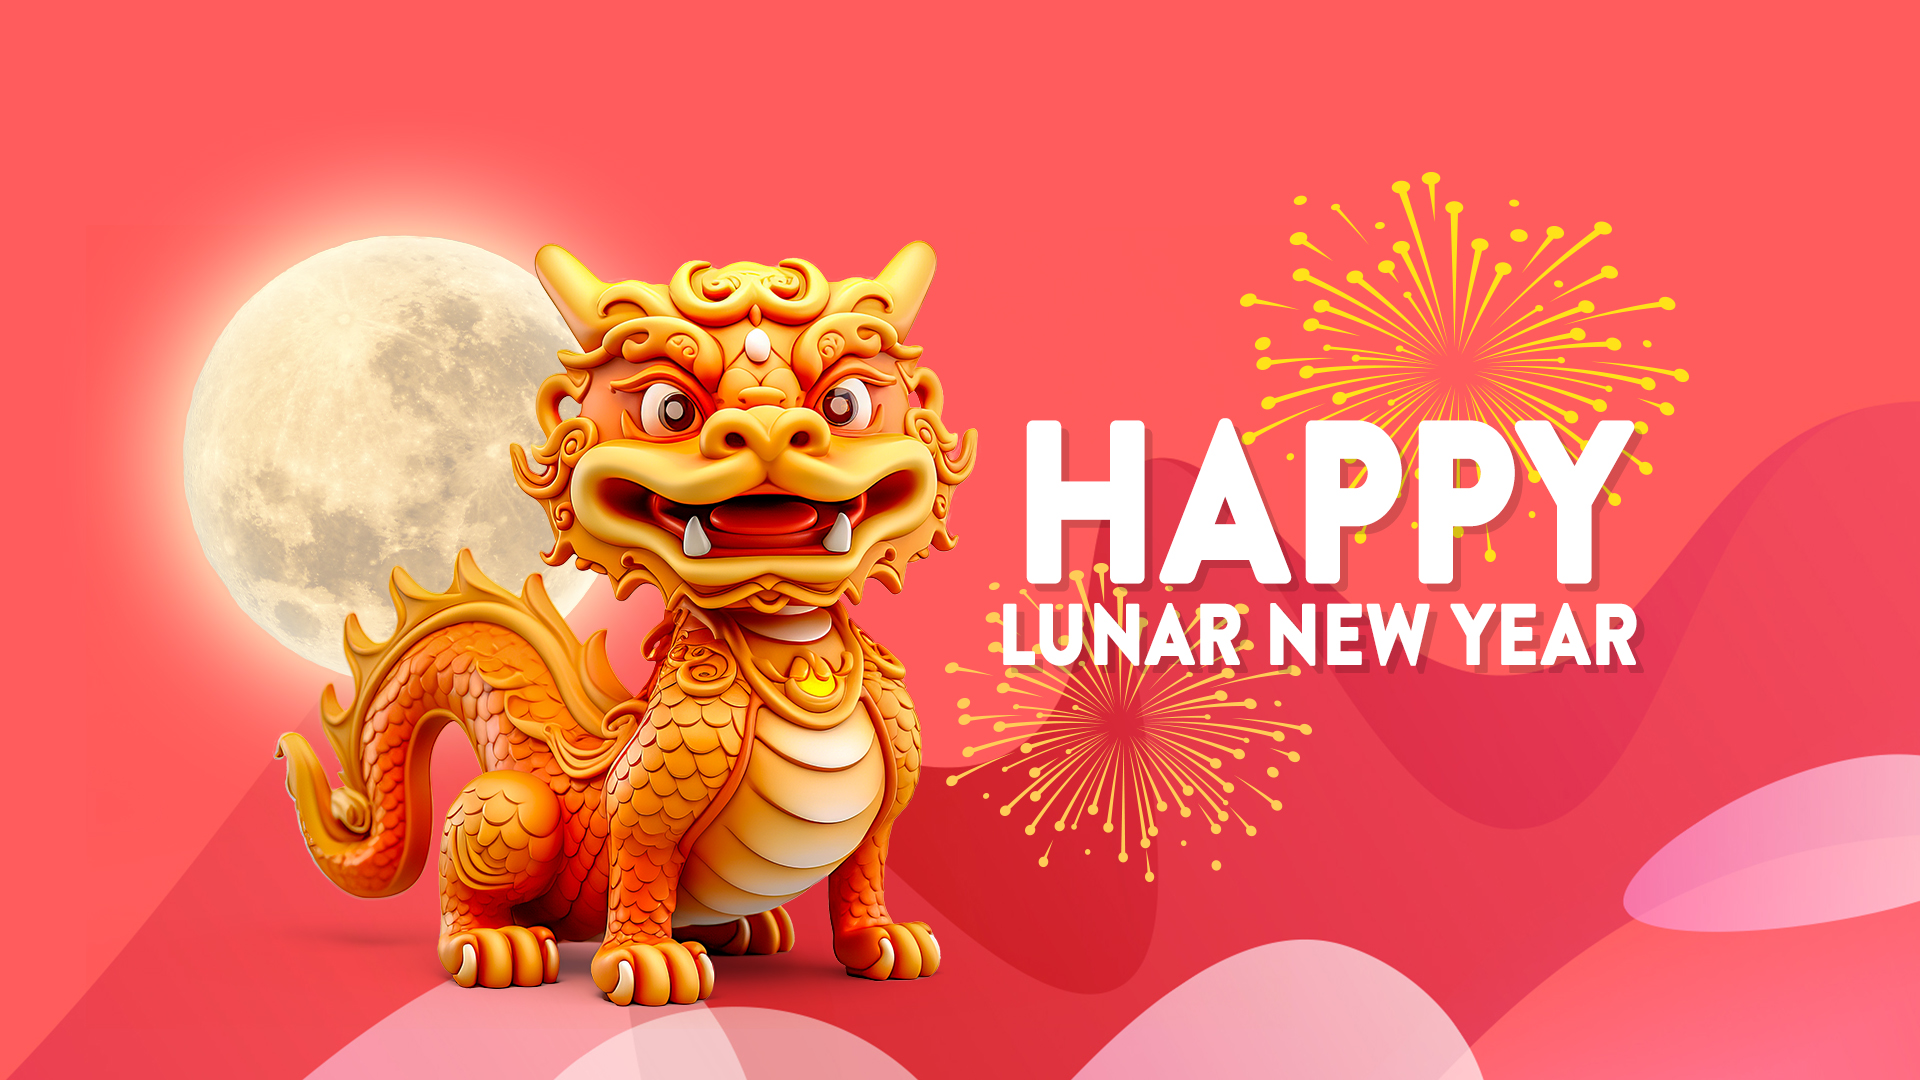 Traditional Chinese dragon is centered, with the wording ‘Happy Lunar New Year’. The moon and exploding fireworks also feature in the distance.